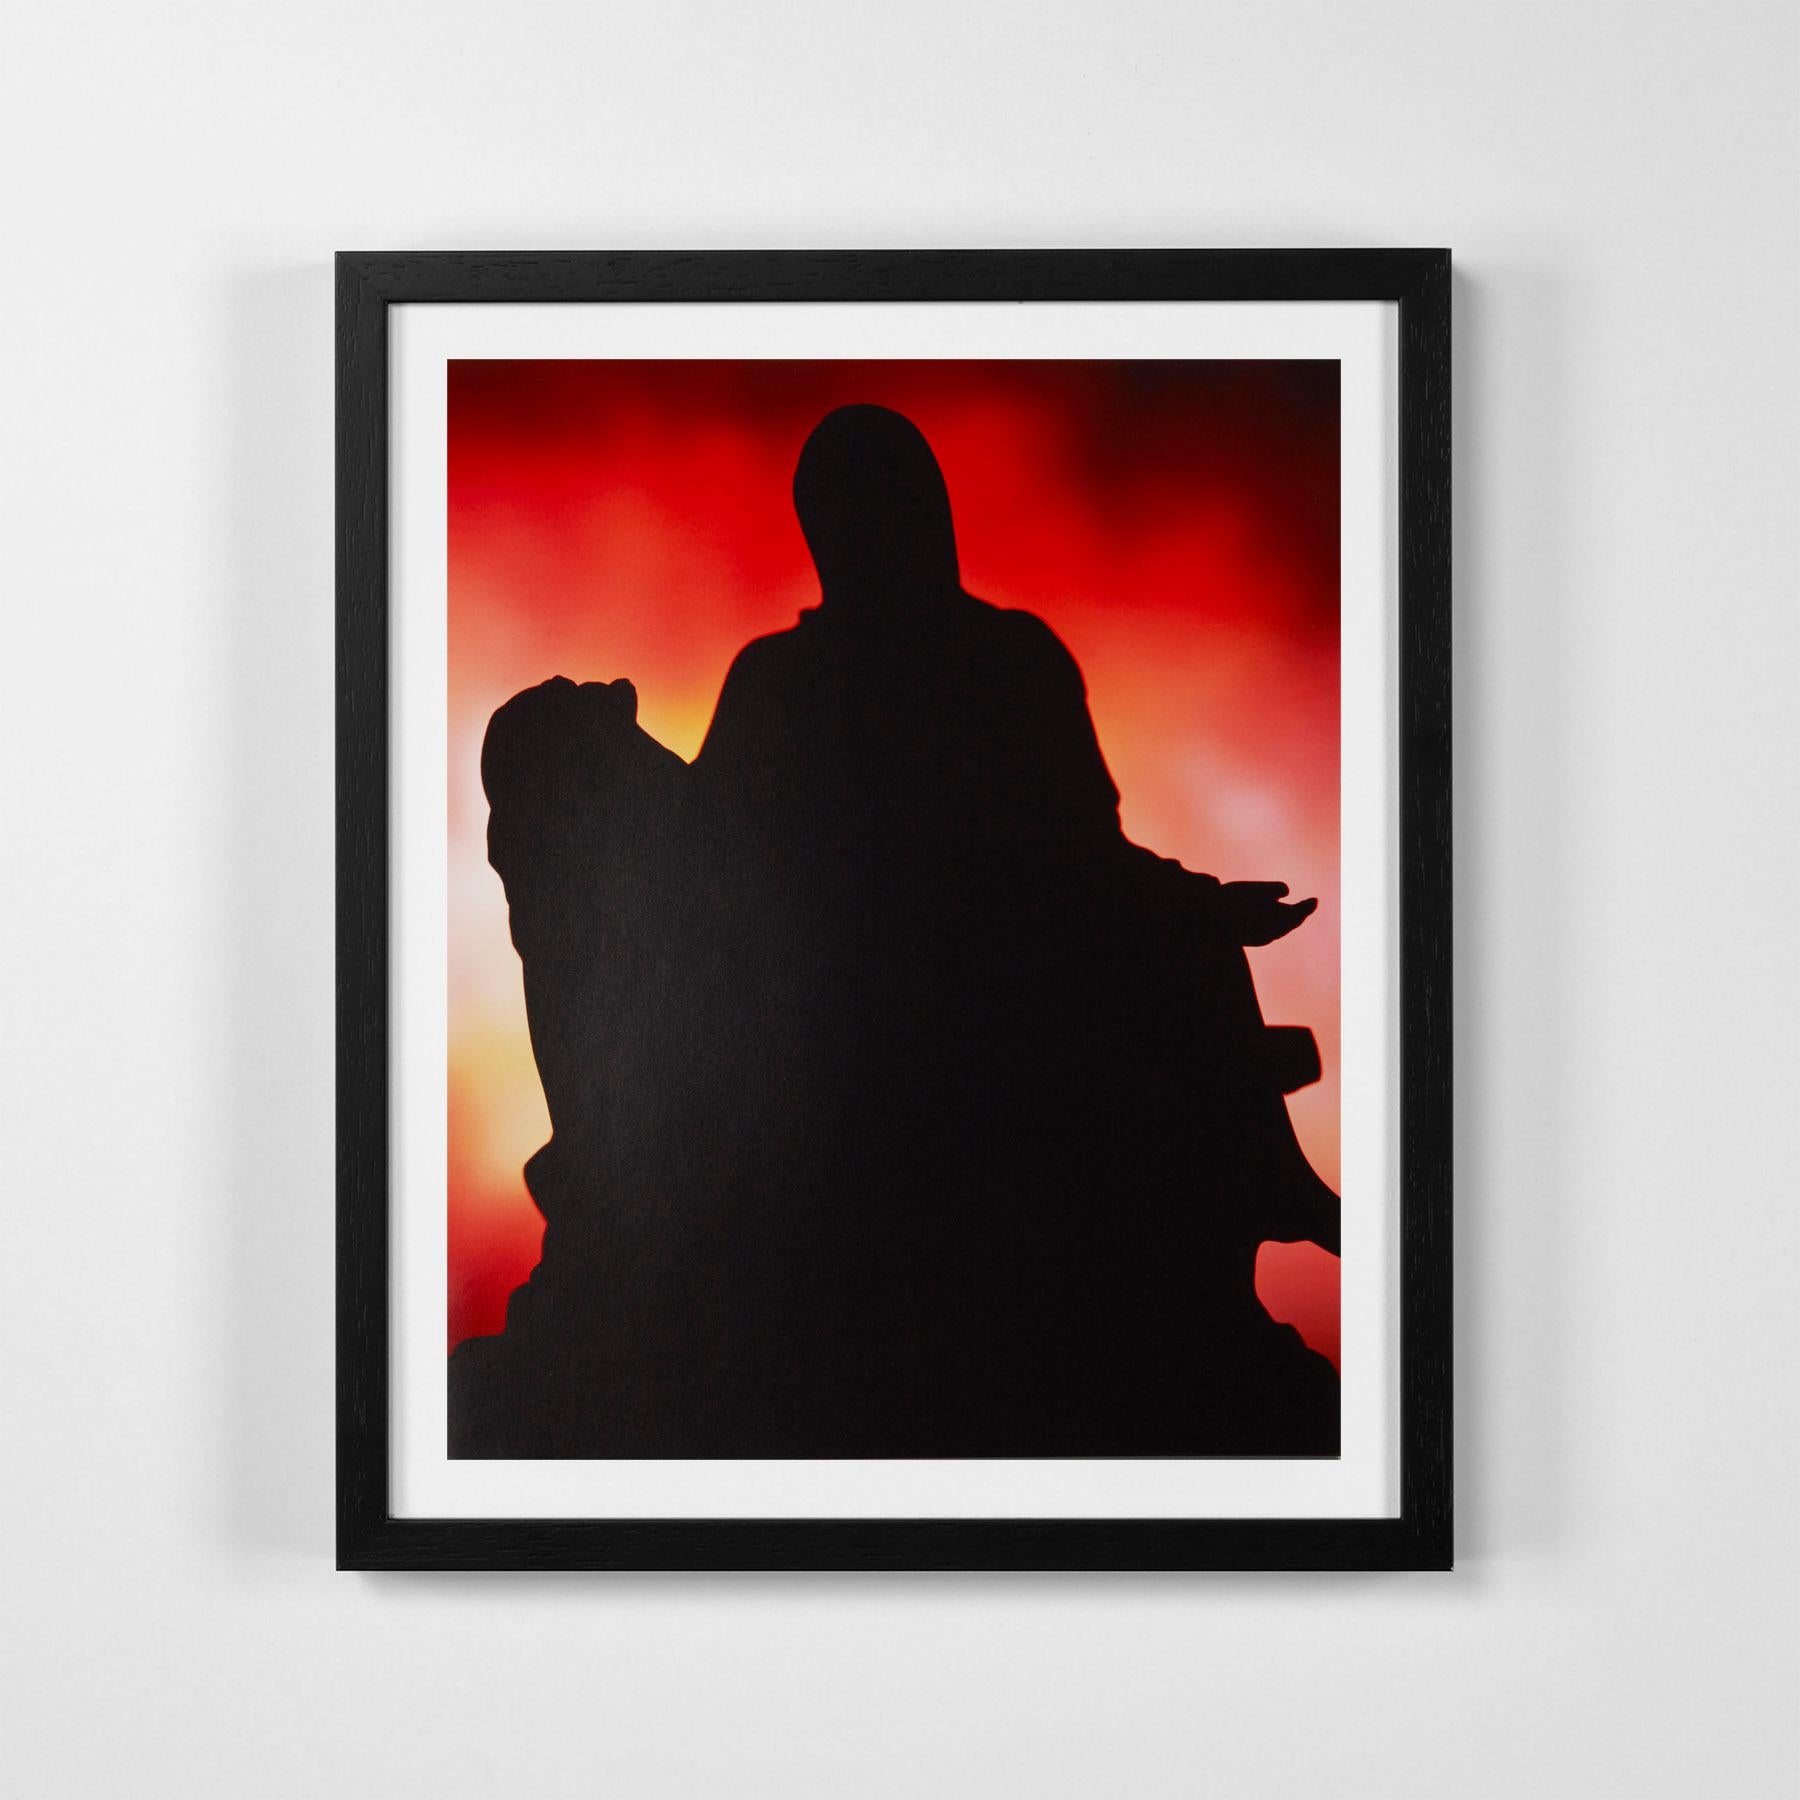 Andres Serrano
Holy Works: Pieta - Contemporary, 21st Century, Digital Print, Limited Edition
Contemporary, 21st Century, Digital Print, Limited Edition
C-Print
Edition of 50 
29,8 x 23,4 cm (11.7 x 9.2 in)
Signed and numbered, accompanied by